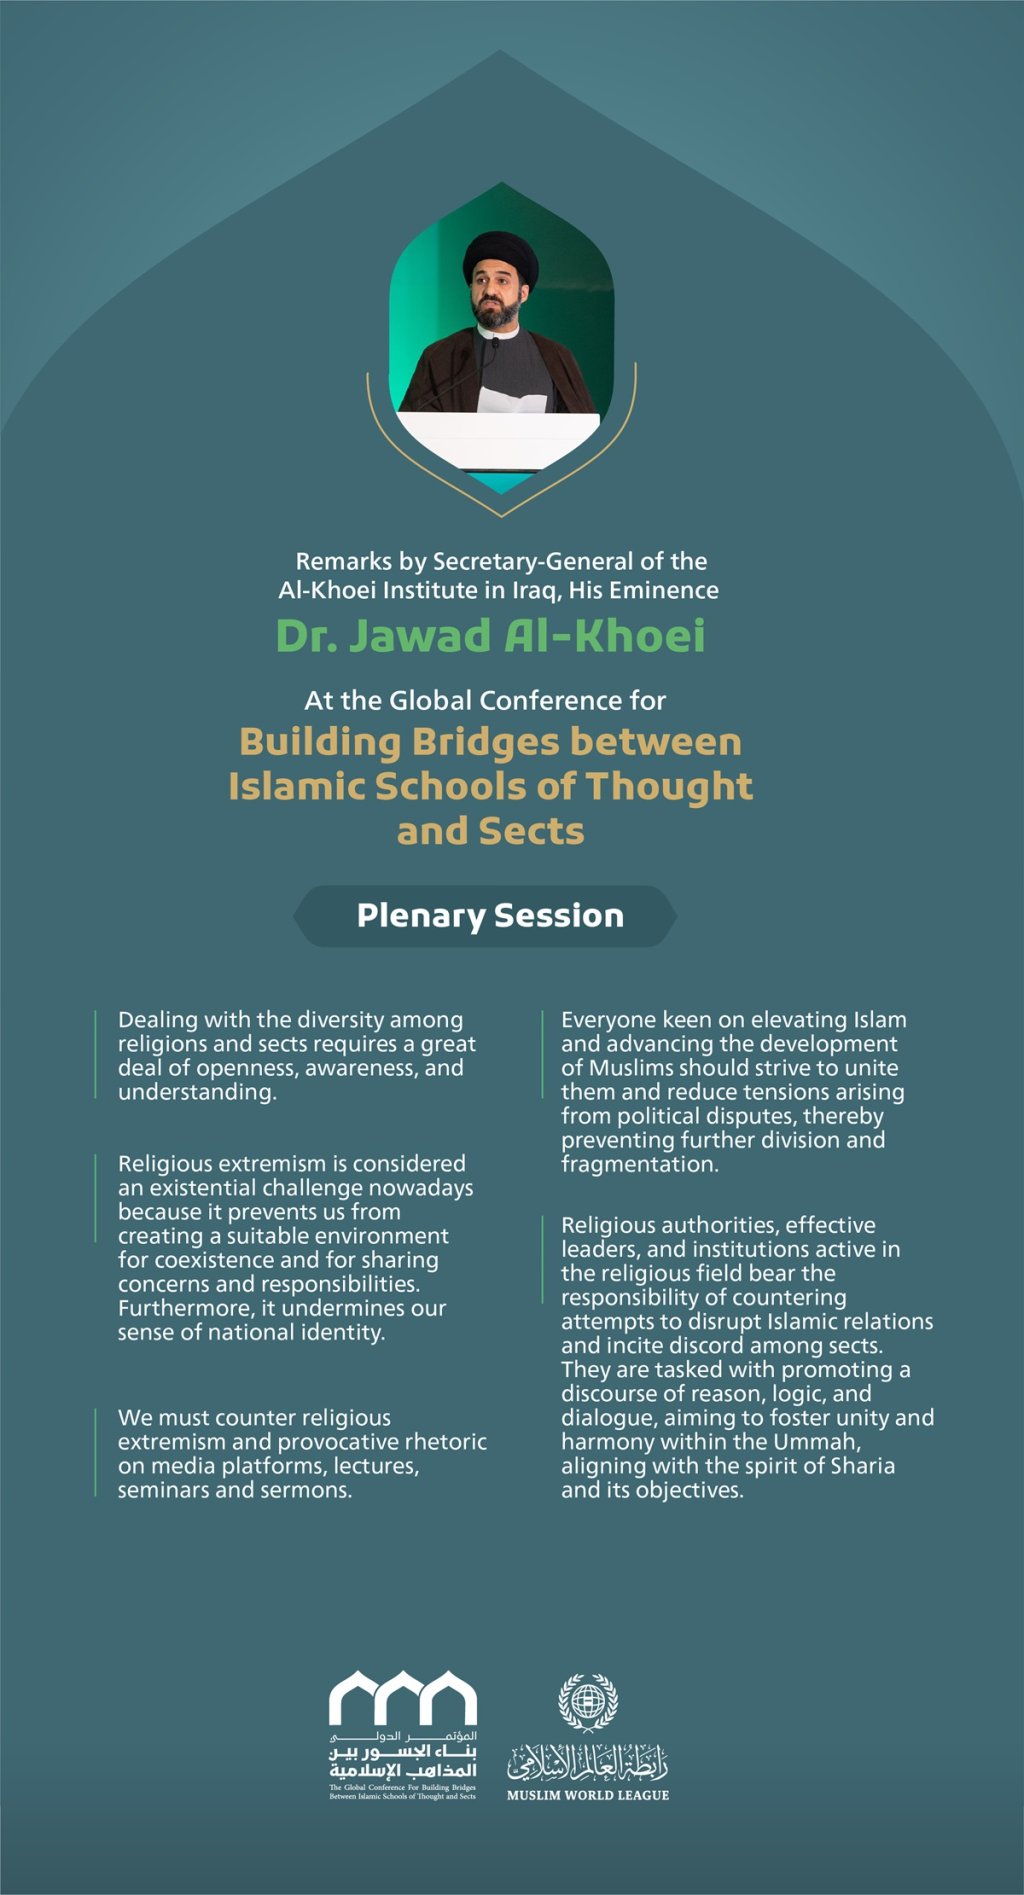 Remarks by His Eminence Dr. Sayyed ‎Jawad Al-‎Khoei, Secretary-General the of the Al-‎Khoei ‎Institute in Iraq‎ at the Global Conference for Building Bridges between Islamic Schools of Thought and Sects.